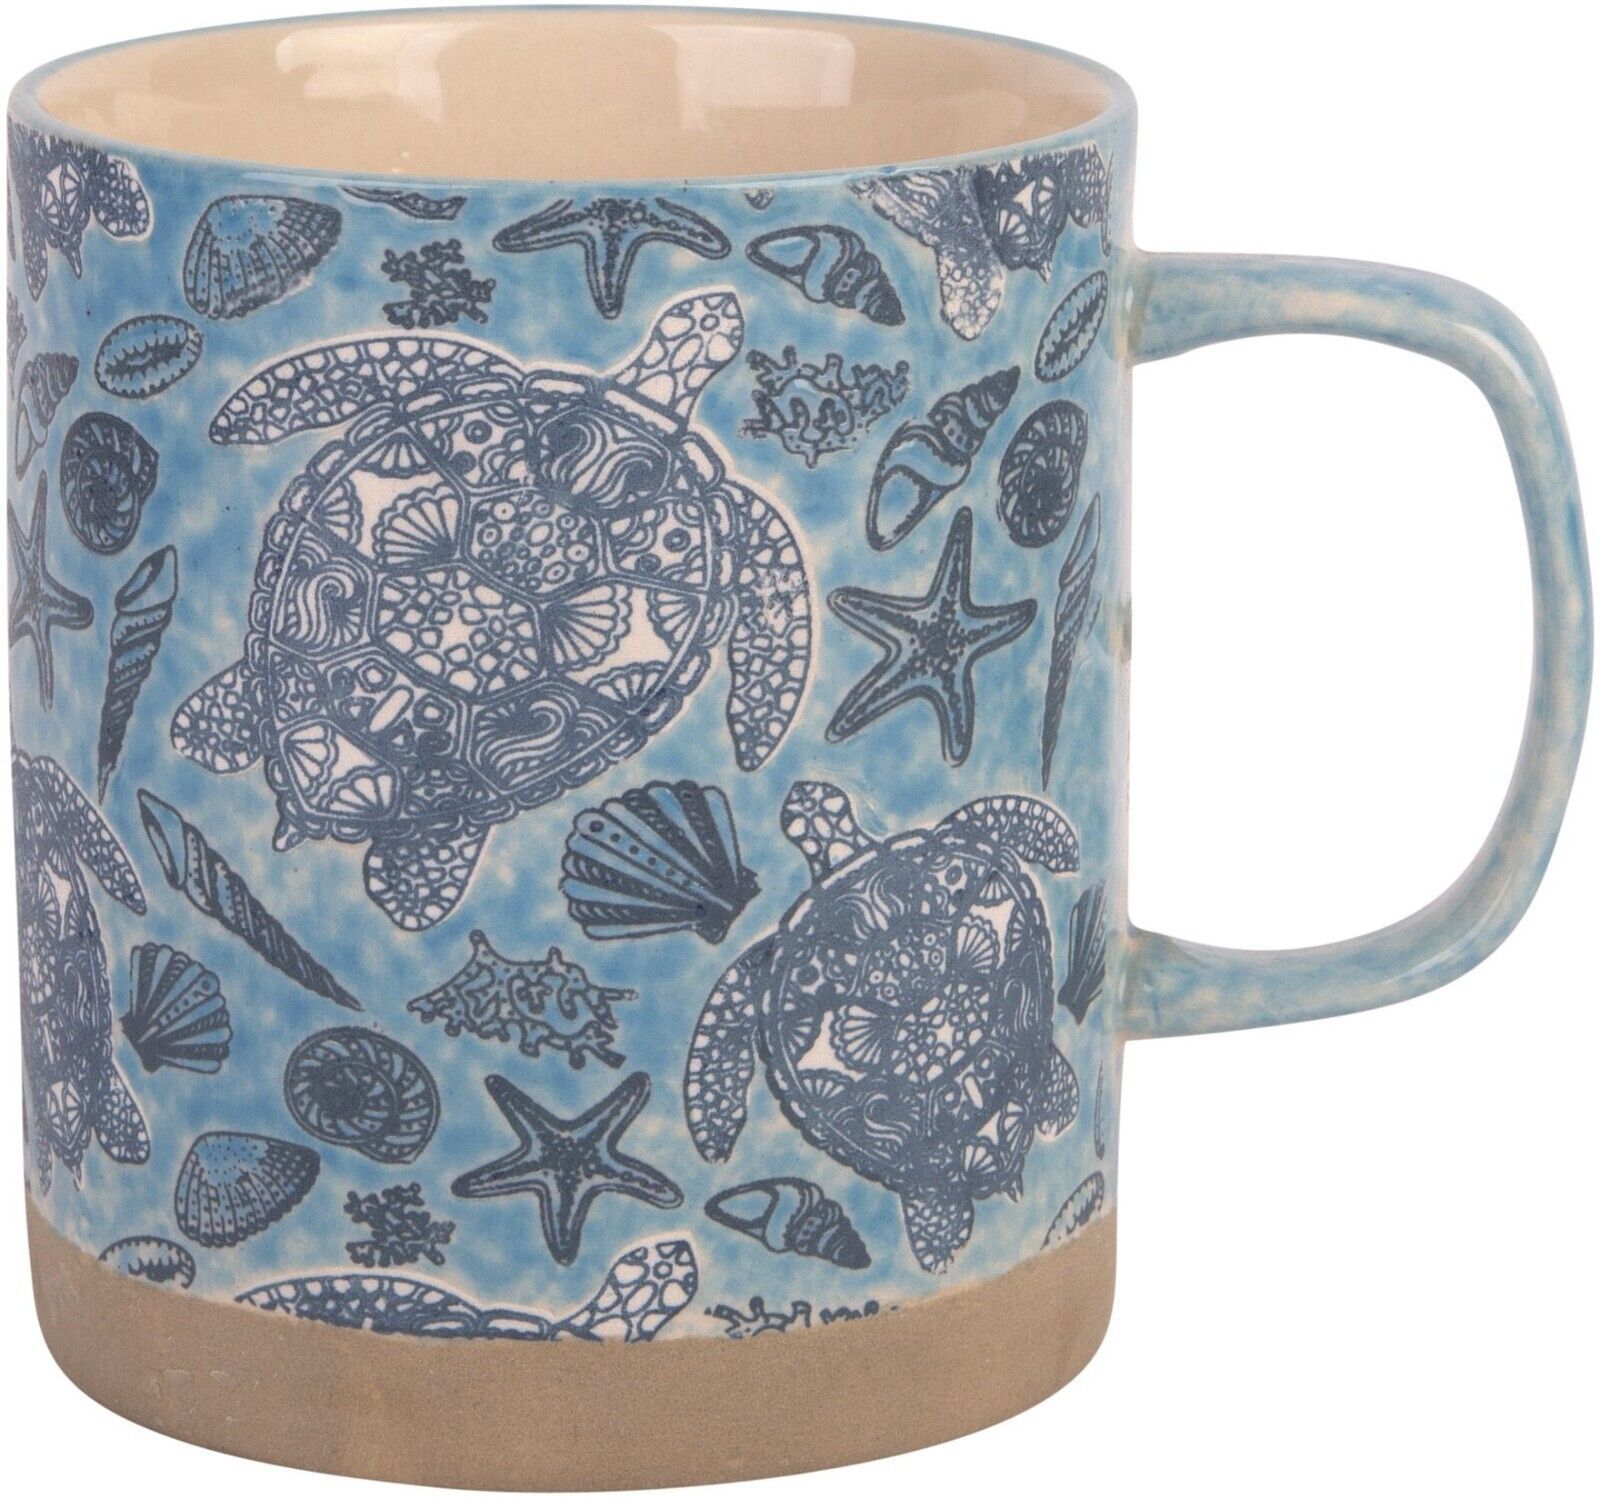 Primary image for 18oz Ocean Blue W-Turtle And All Over Seashells Design Mug Set of 2